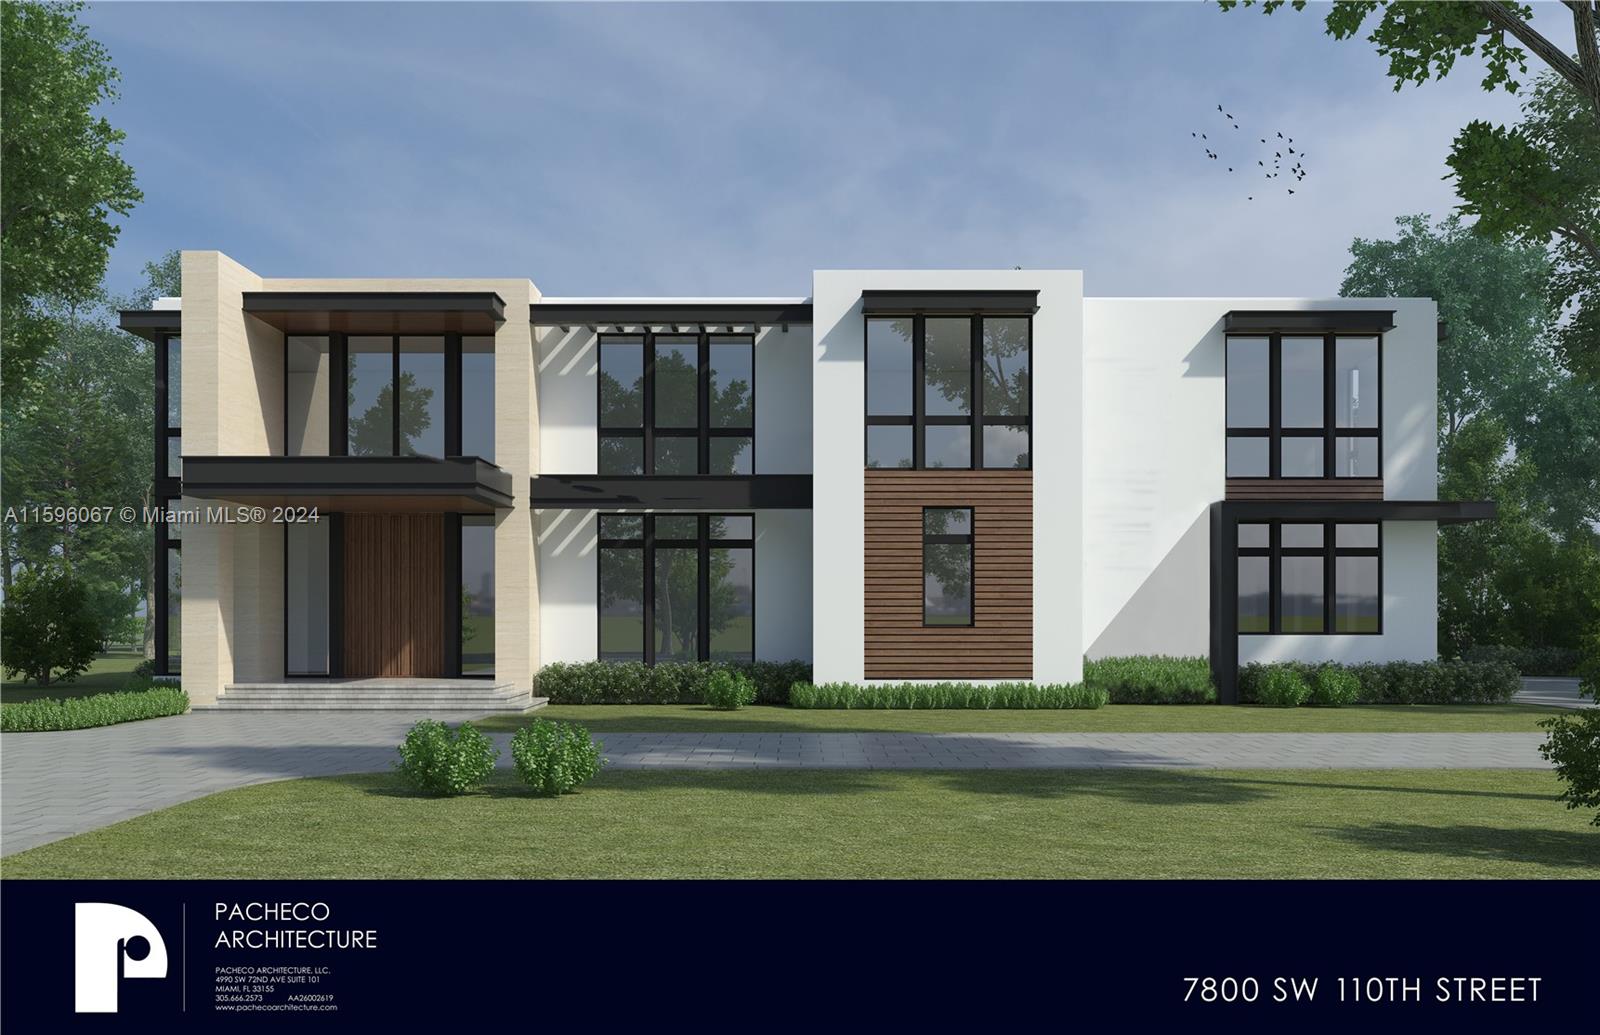 A stunning new construction project is coming to the lush Pinecrest area, 8777 sqft total and with 6200 sqft of living space with delivery expected by the end of 2025. This modern residence features 7 spacious bedrooms, 8 full bathrooms, powder room, media room, guest house, private gym,& a three-car garage. Enjoy expansive open-concept living spaces with large panoramic sliding doors, a gourmet kitchen with a walk-in pantry, & a magnificent pool. The property is surrounded by a lush tropical garden, creating a serene and picturesque setting. This home offers the perfect blend of modern sophistication & natural beauty, providing a resort-like experience right at home. Don't miss this opportunity to own a masterpiece in Pinecrest, conveniently located near top schools, parks, and shopping.